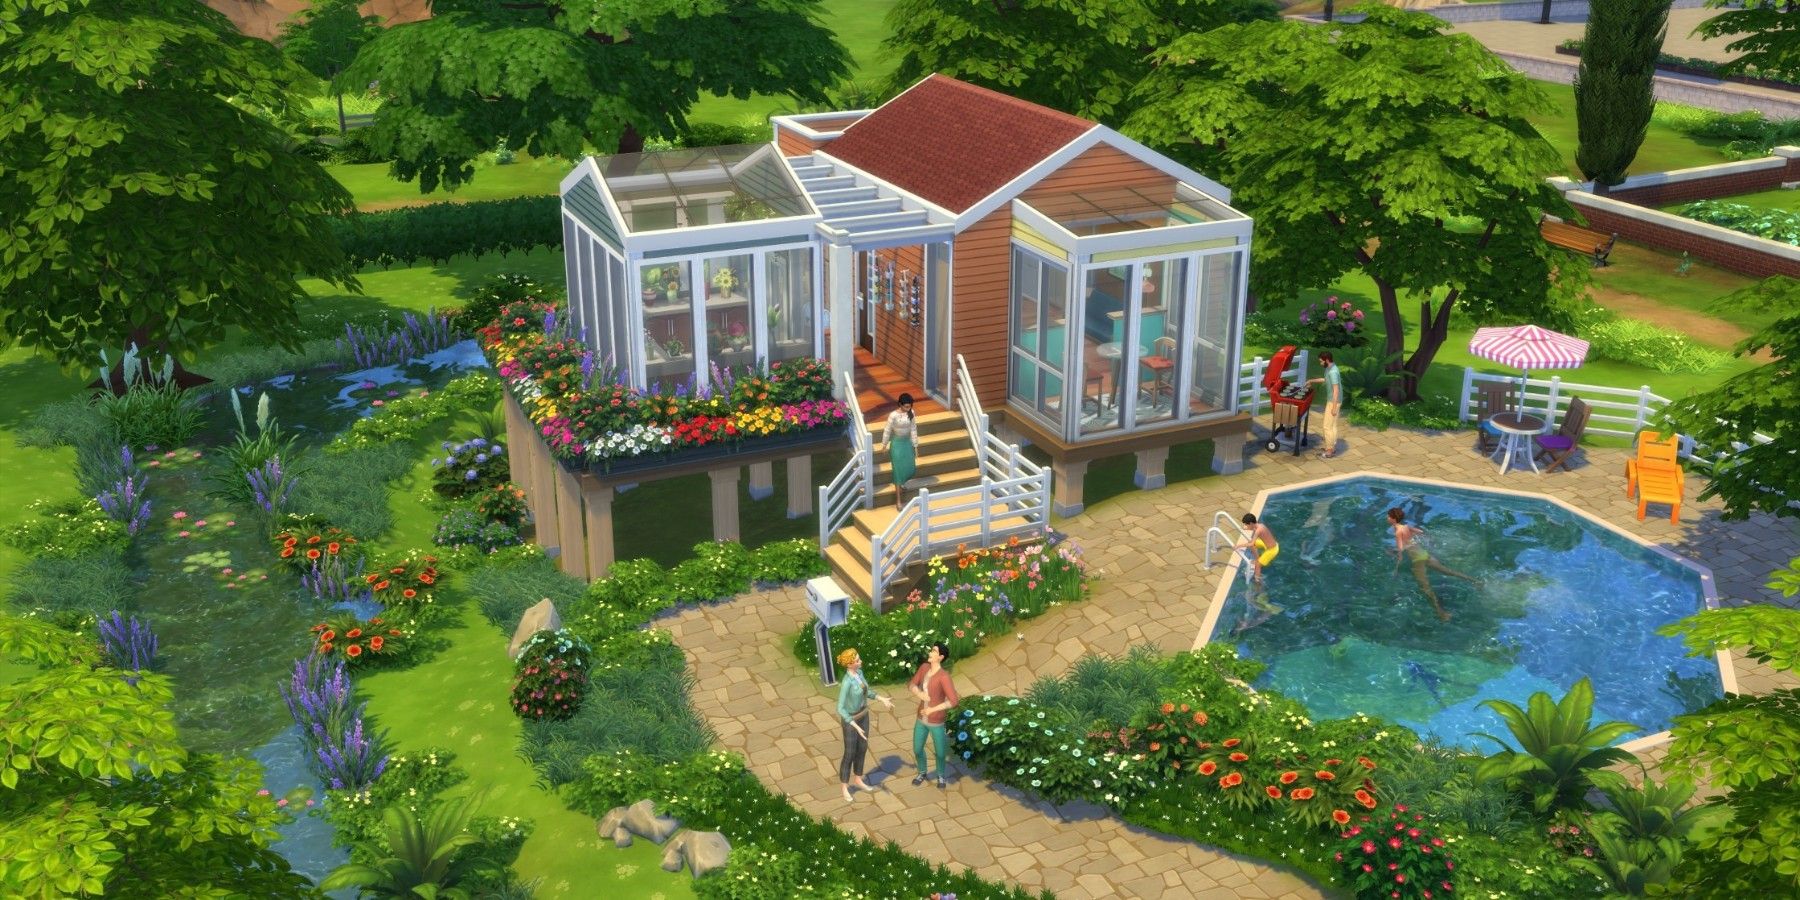 A small house in The Sims 4